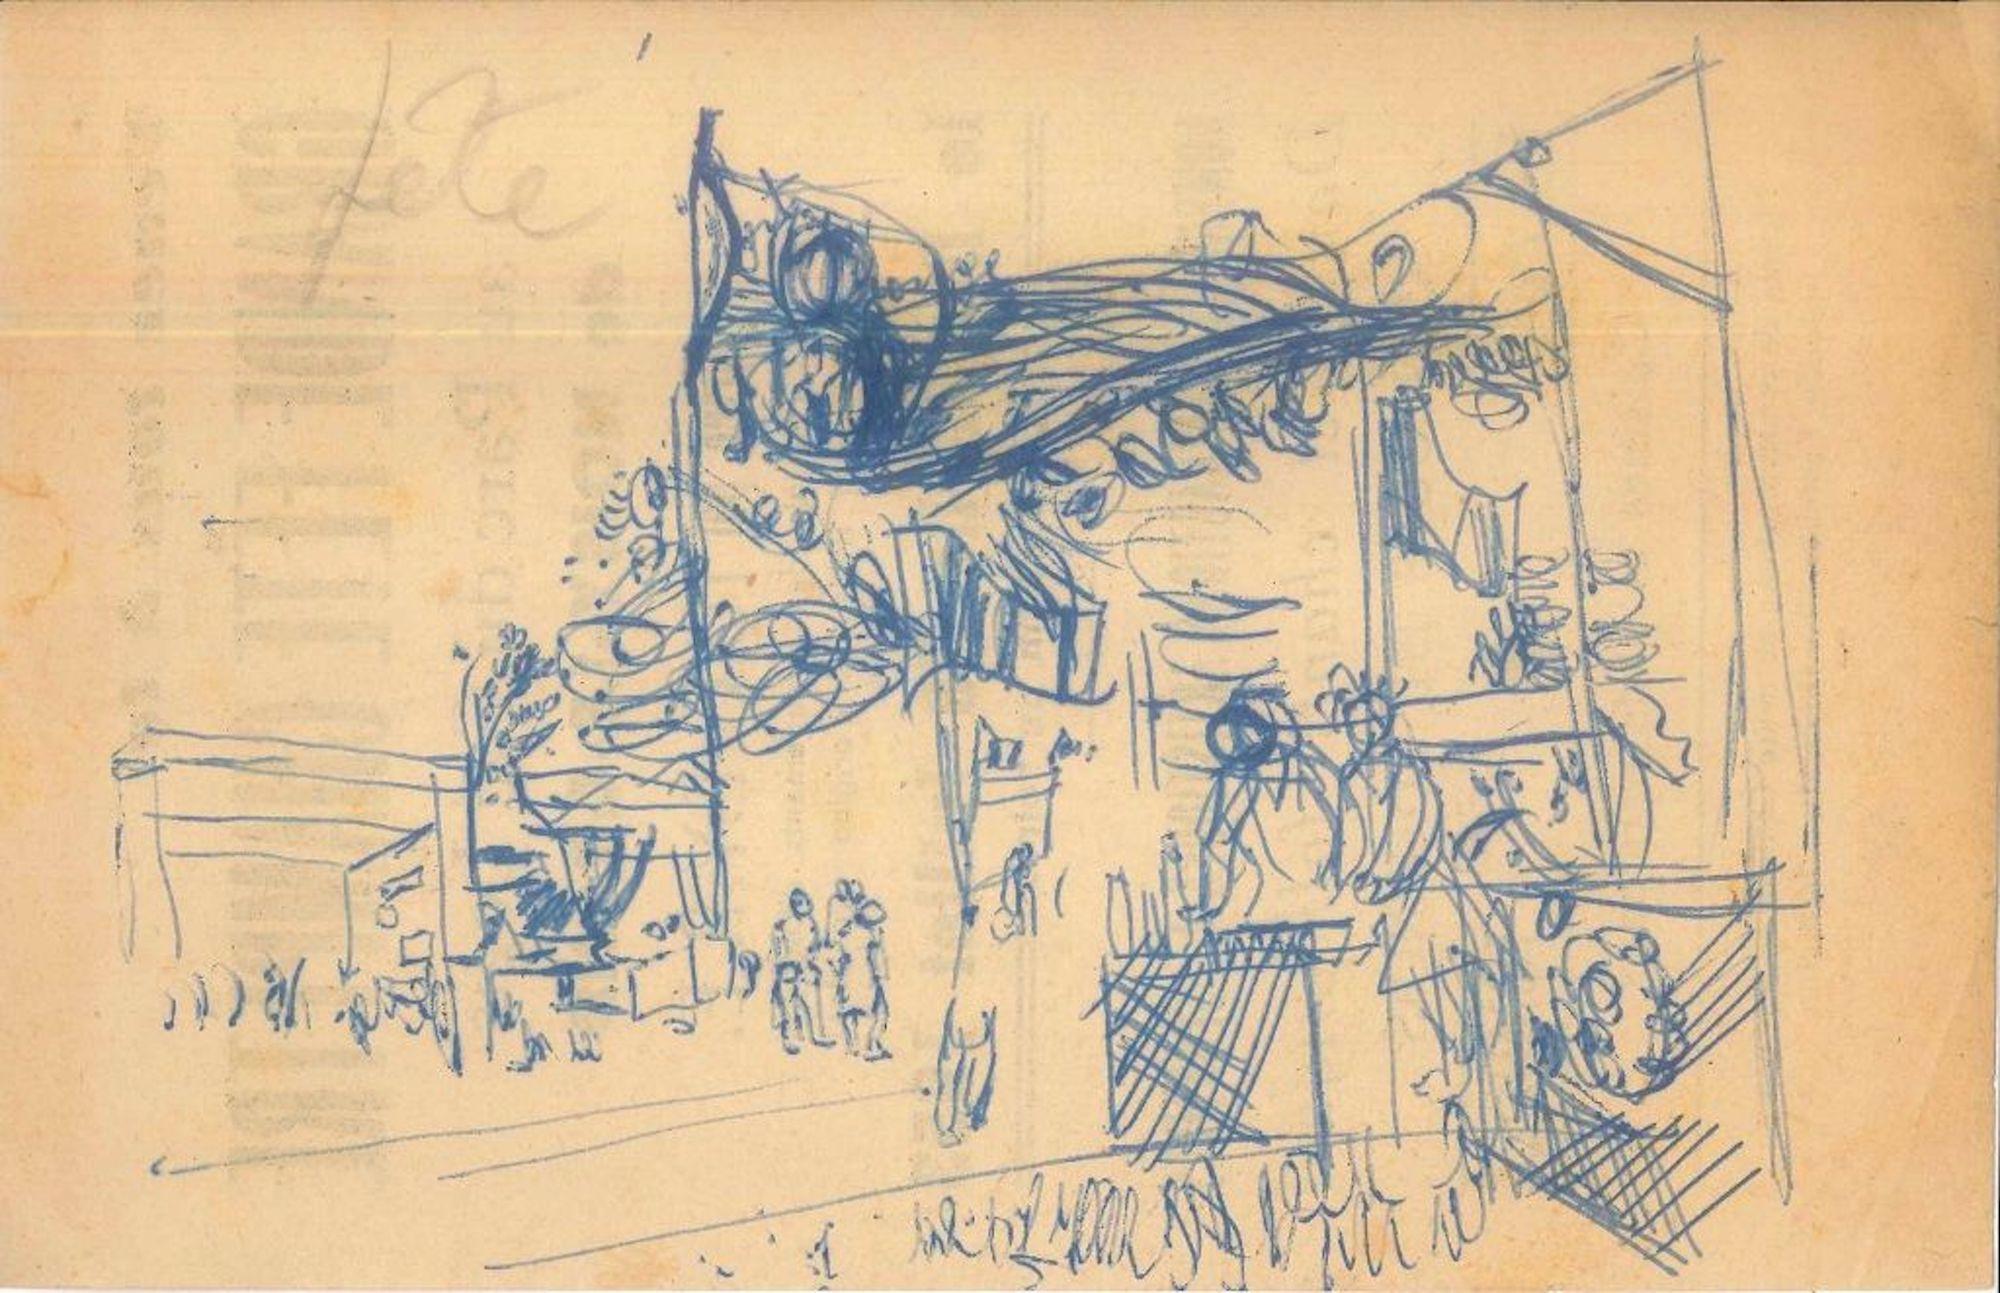 Party is a blue China ink original drawing realized on cream-colored paper by the artist Jeanne Daour (Bucharest,1914-?).

Titled in pencil and in French on higher left margin.

This beautiful original drawing rapidly sketched on an advertising